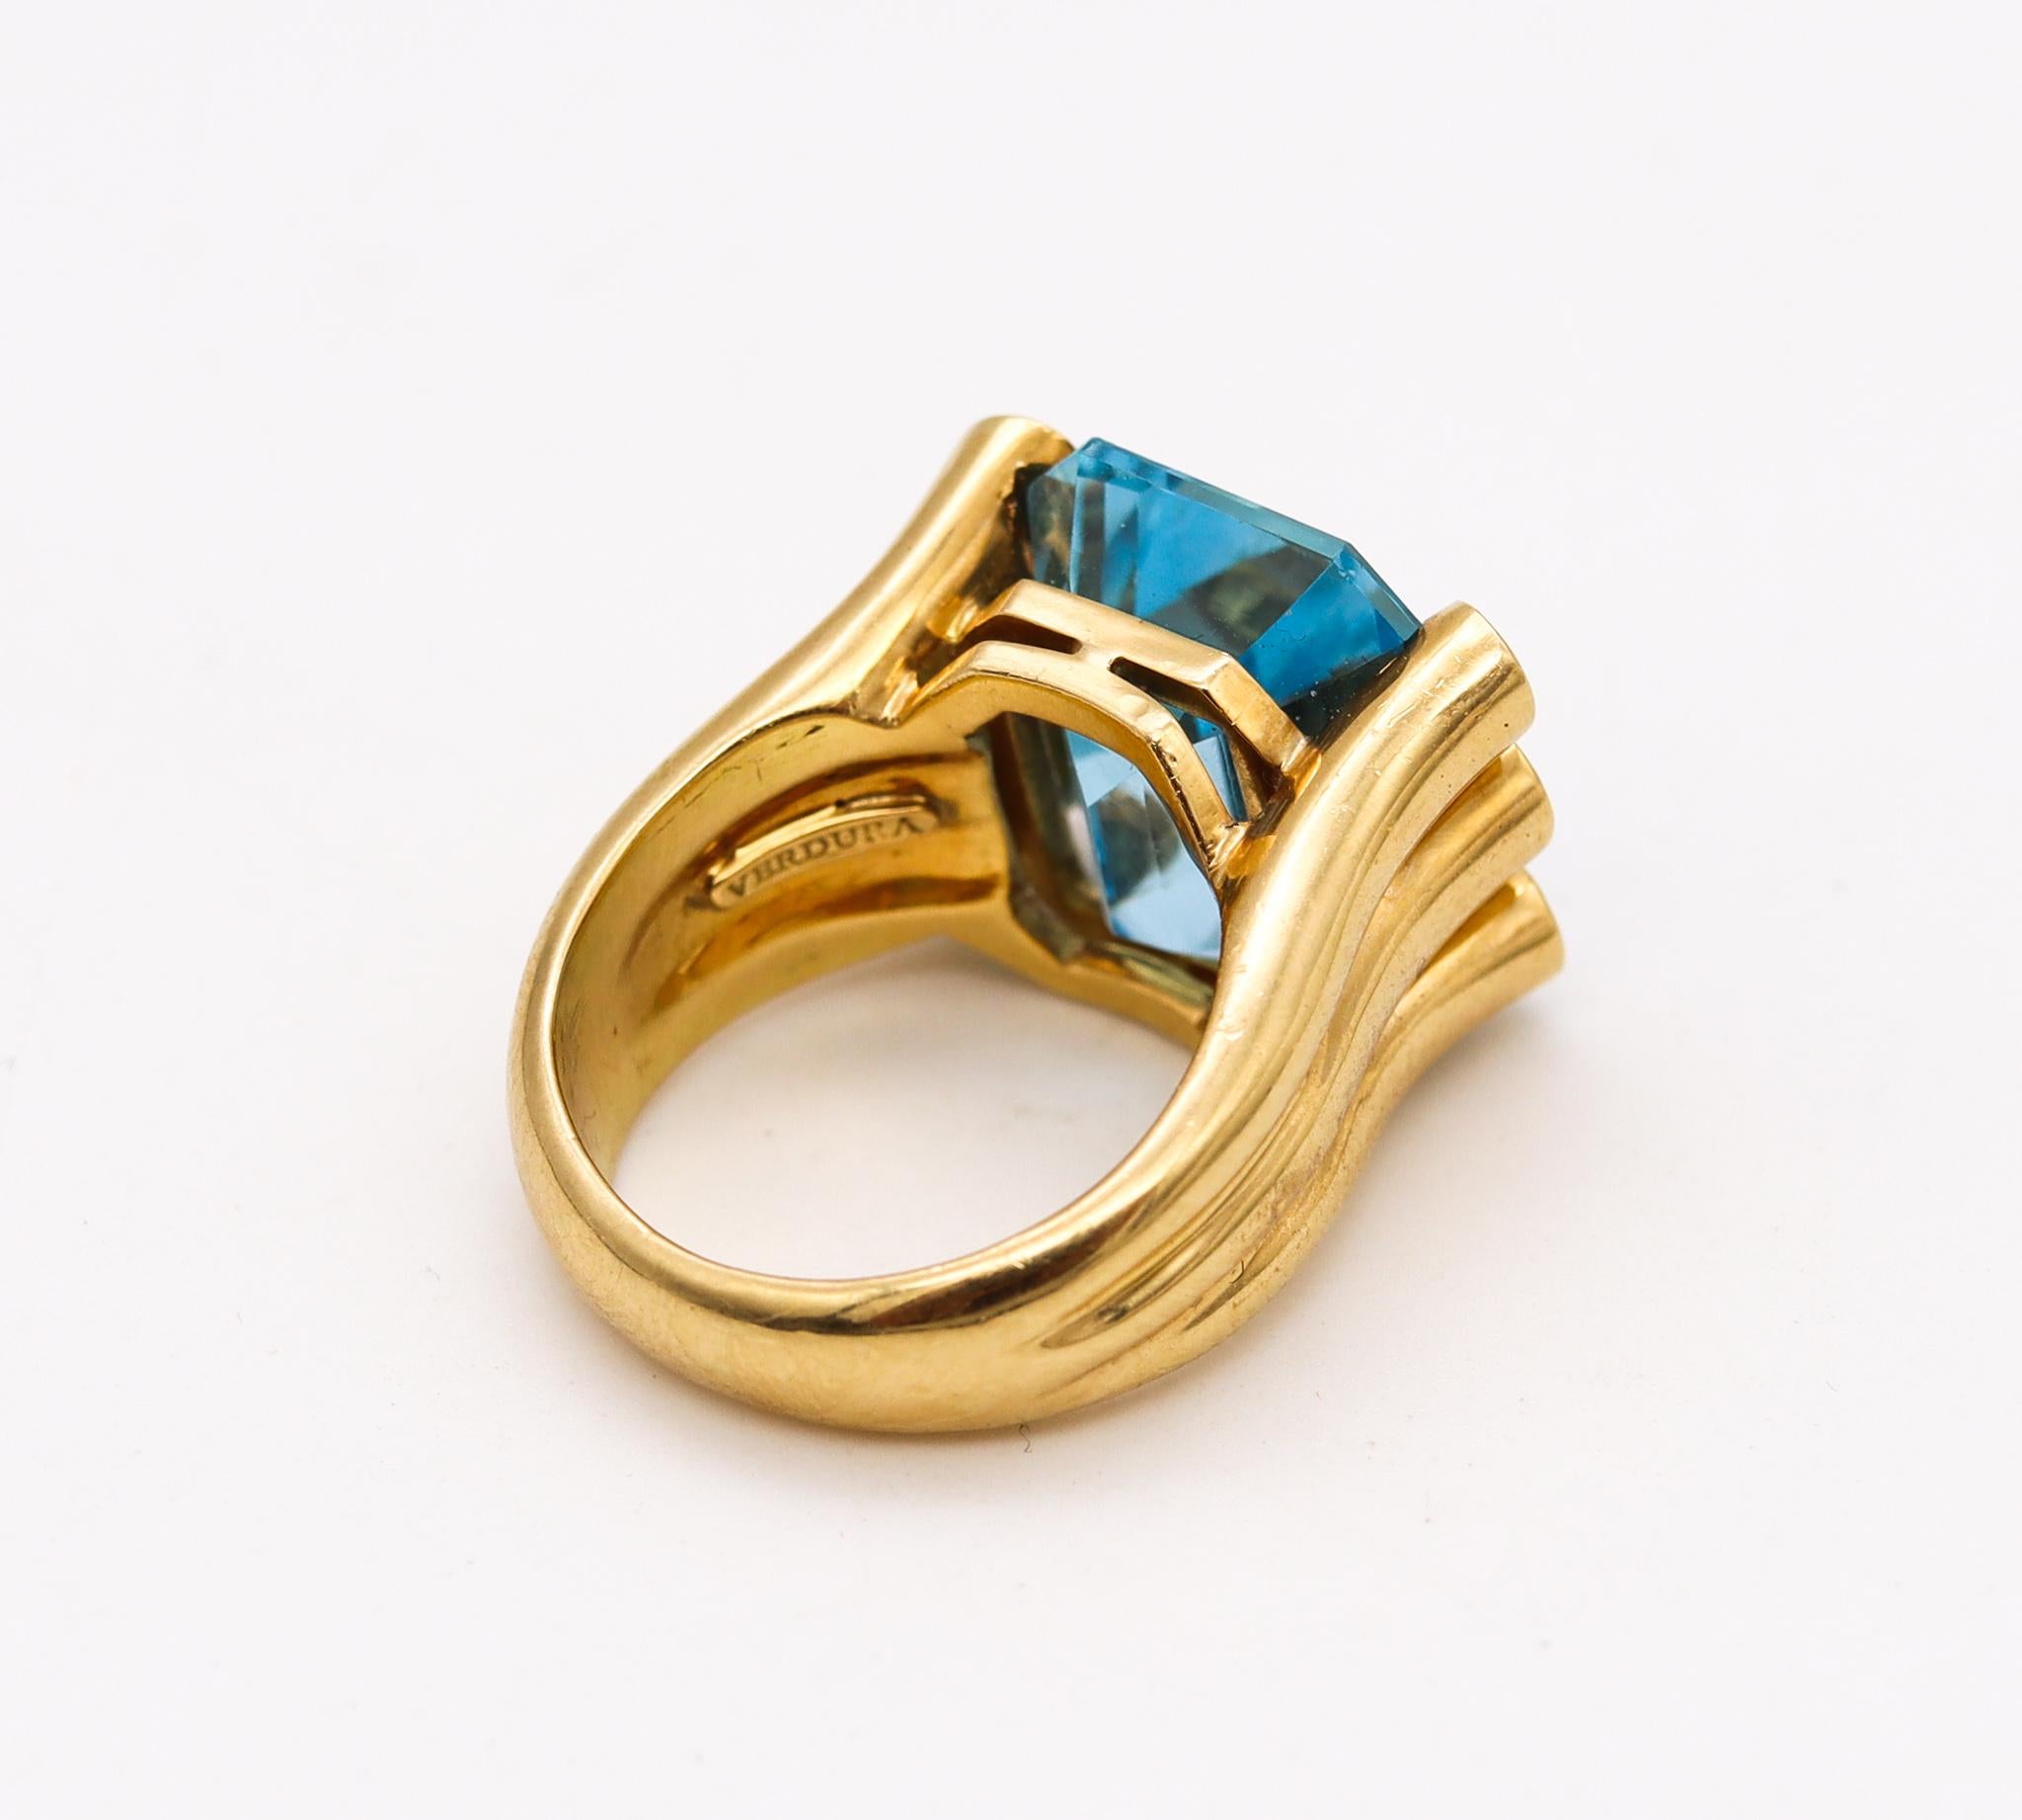 Mixed Cut Verdura Milan Cocktail Ring in 18kt Gold with 12.31 Cts in Aquamarine & Diamonds